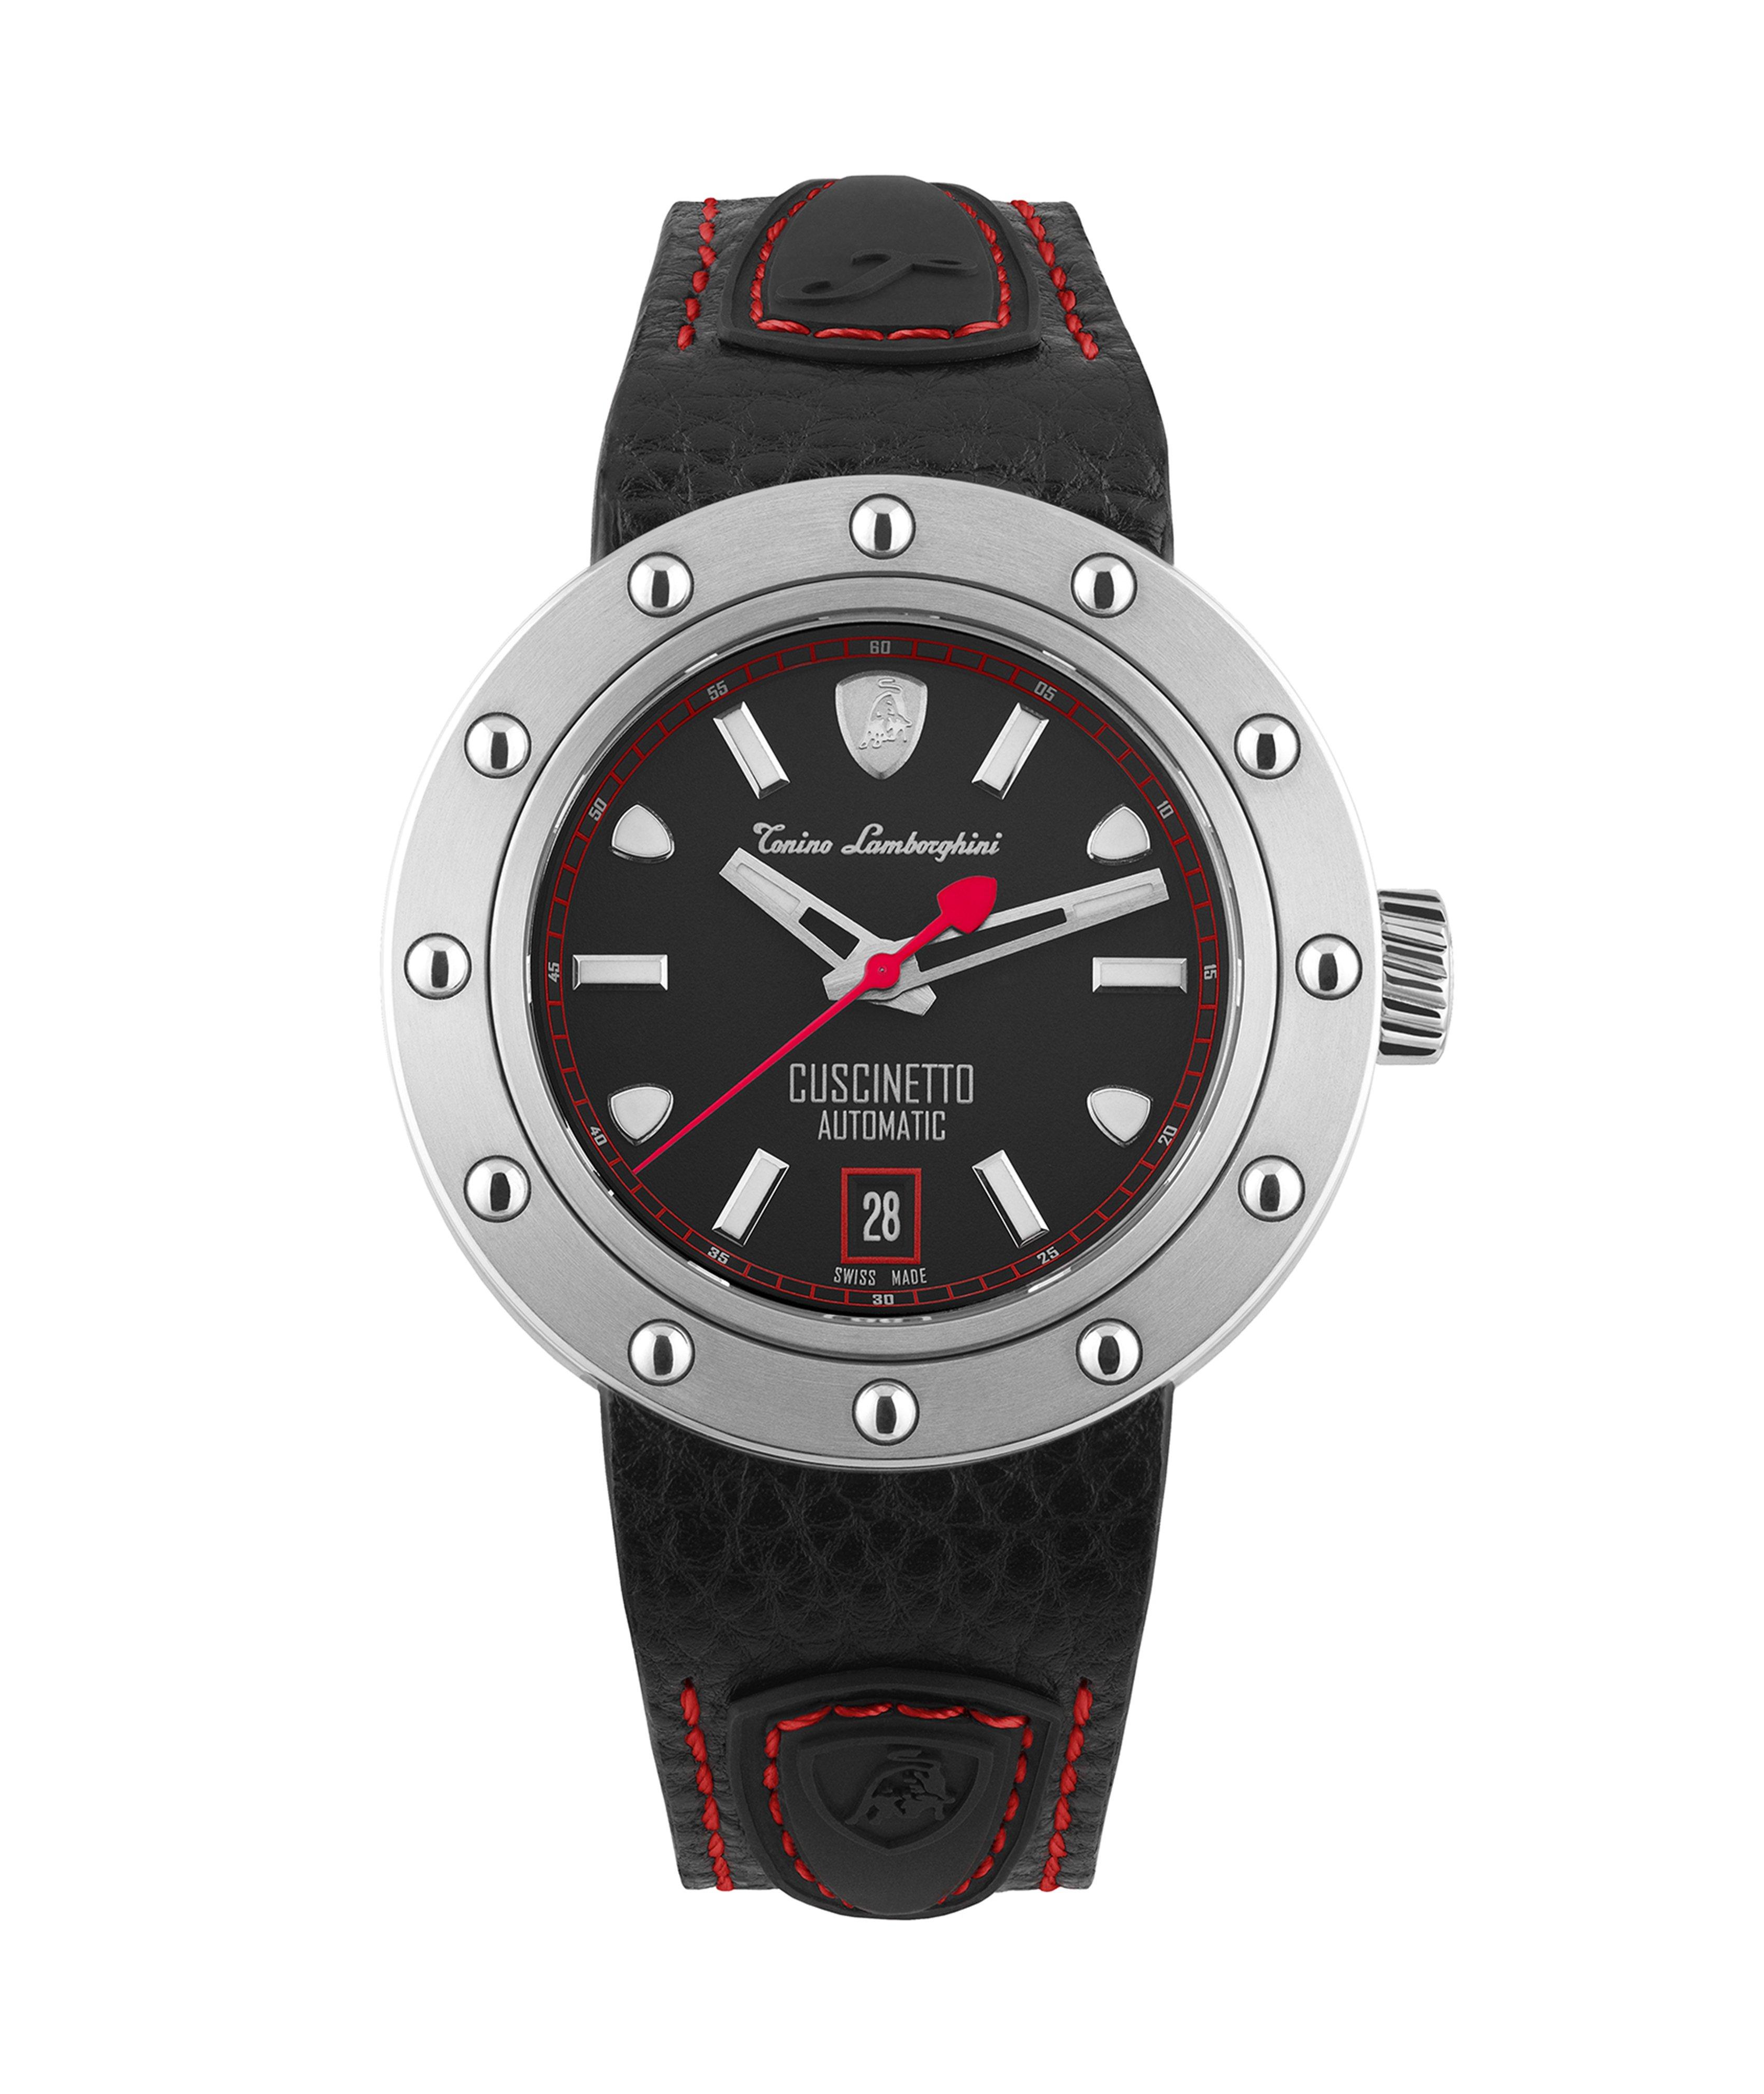 Cuscinentto Automatic Watch  image 0